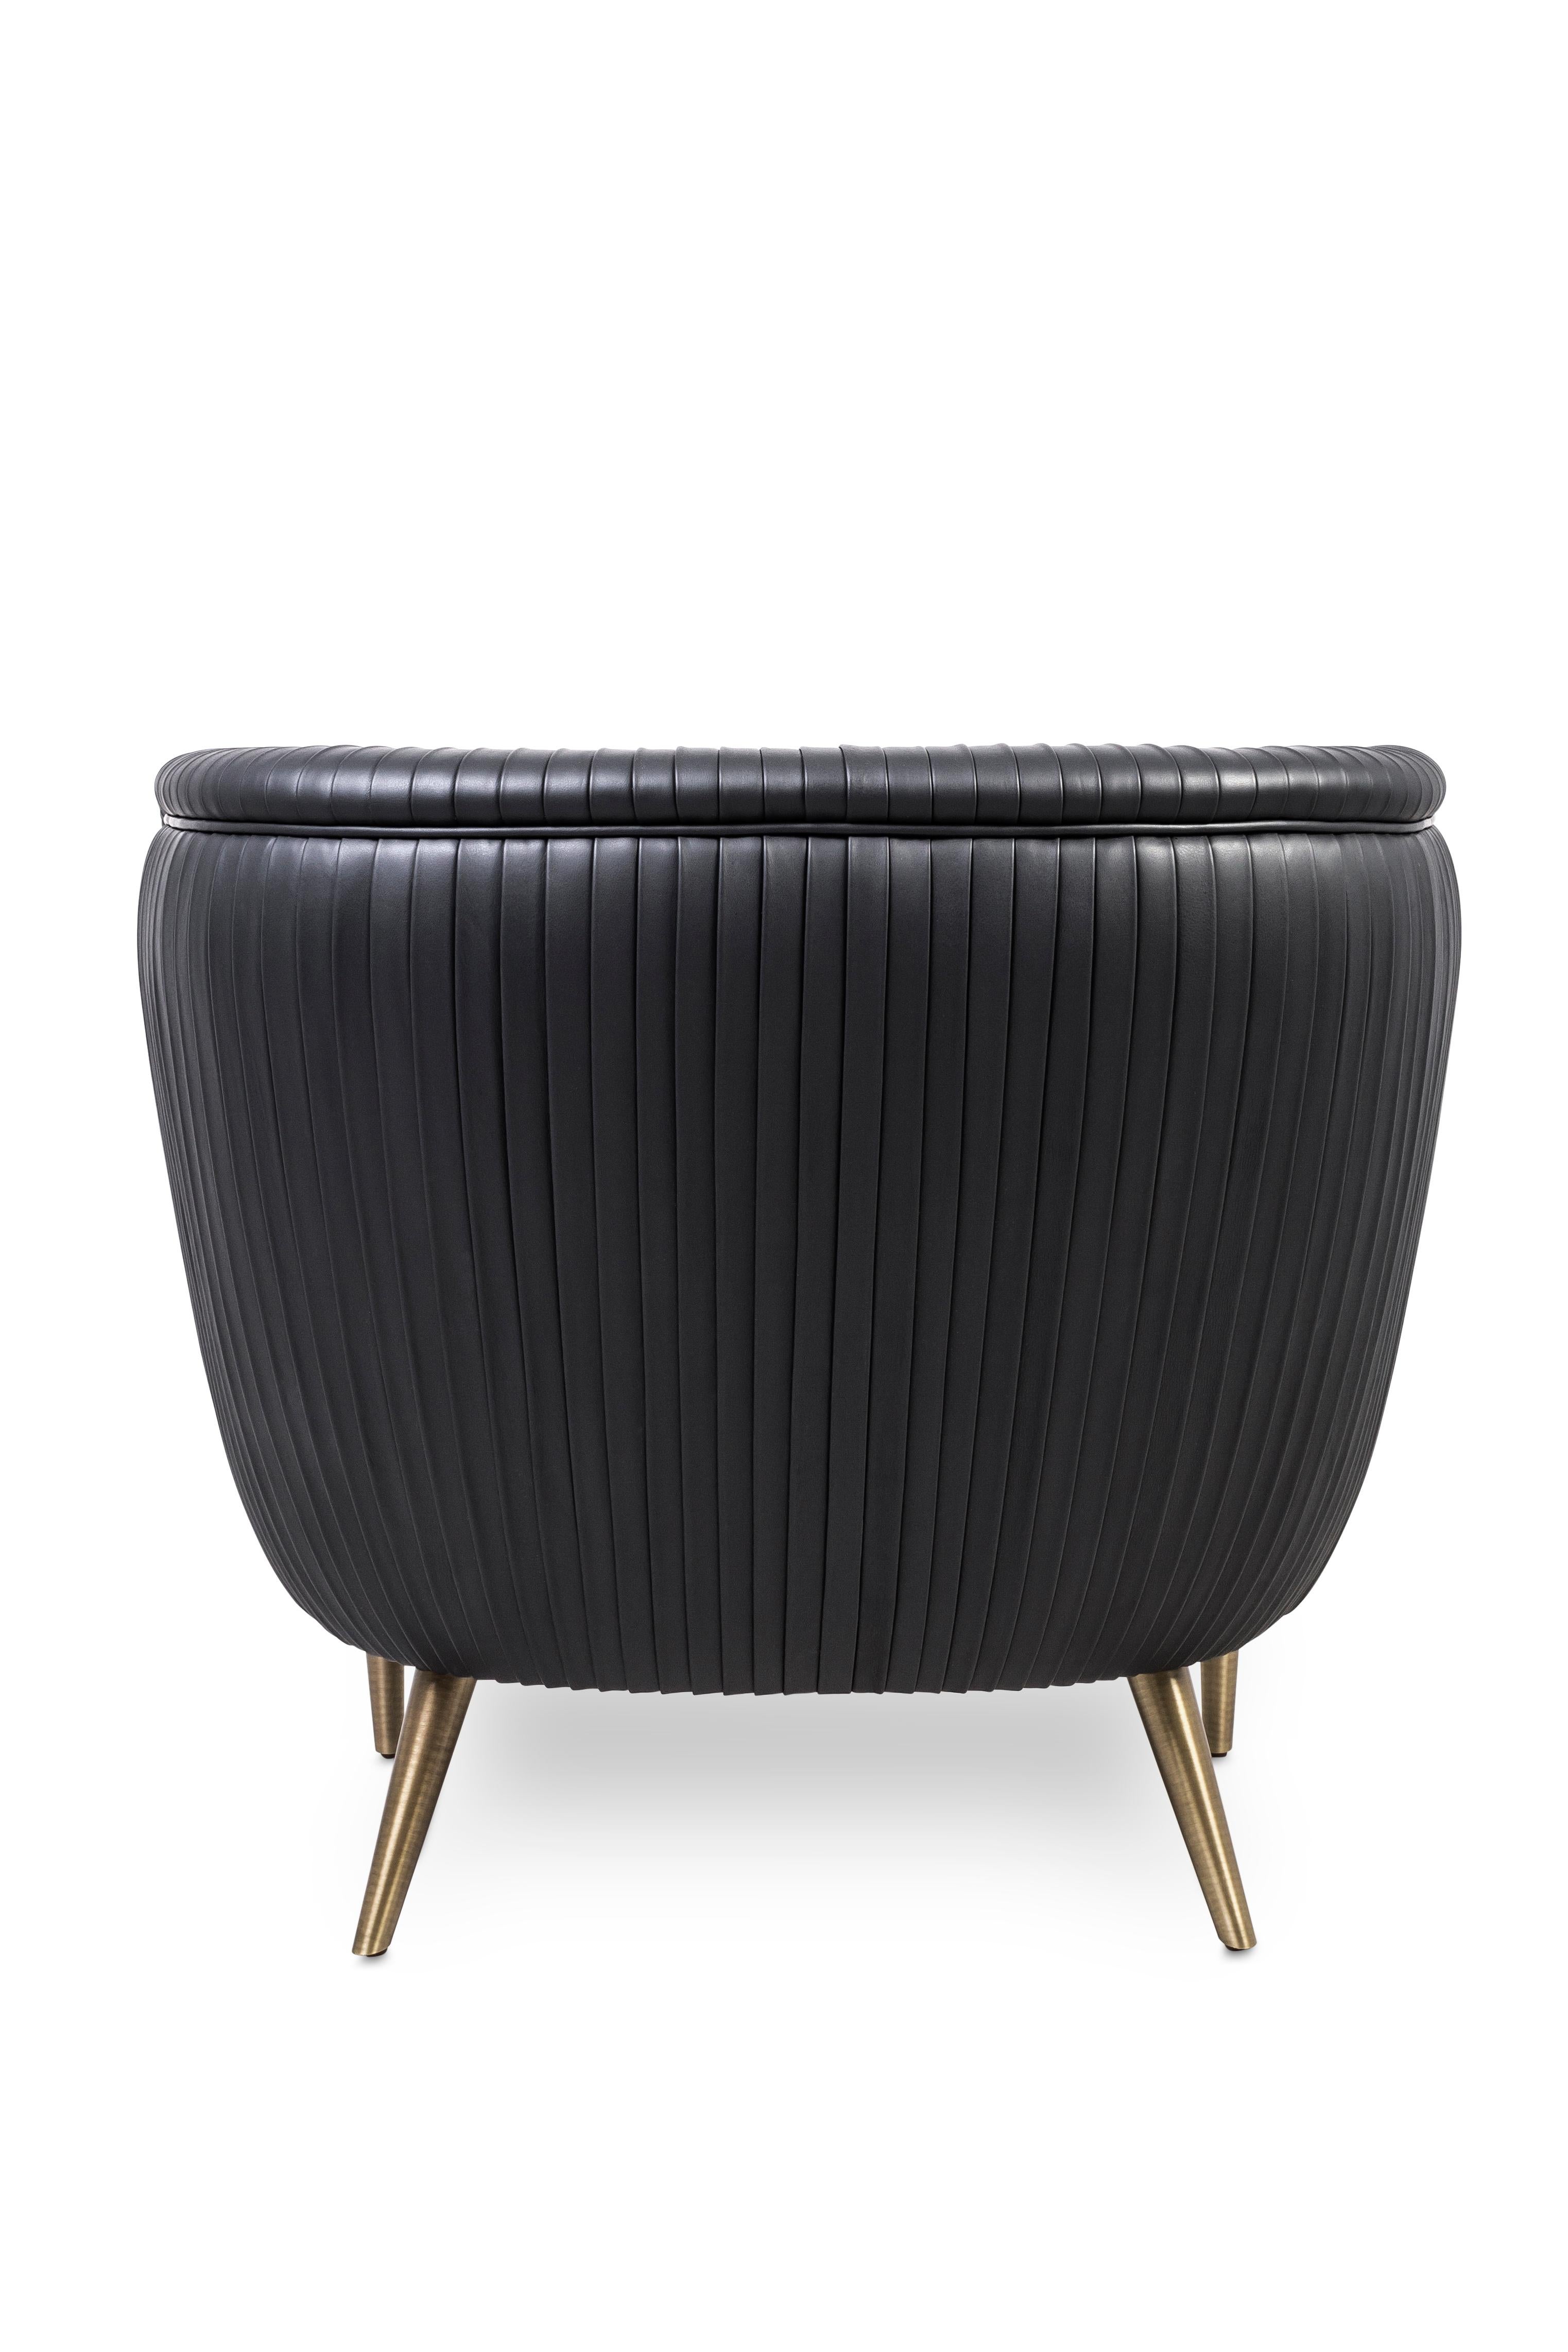 Alfama Armchair, Upholstered in Leather, Feet in Oxidized Brushed Brass In New Condition For Sale In Fiscal Amares, PT